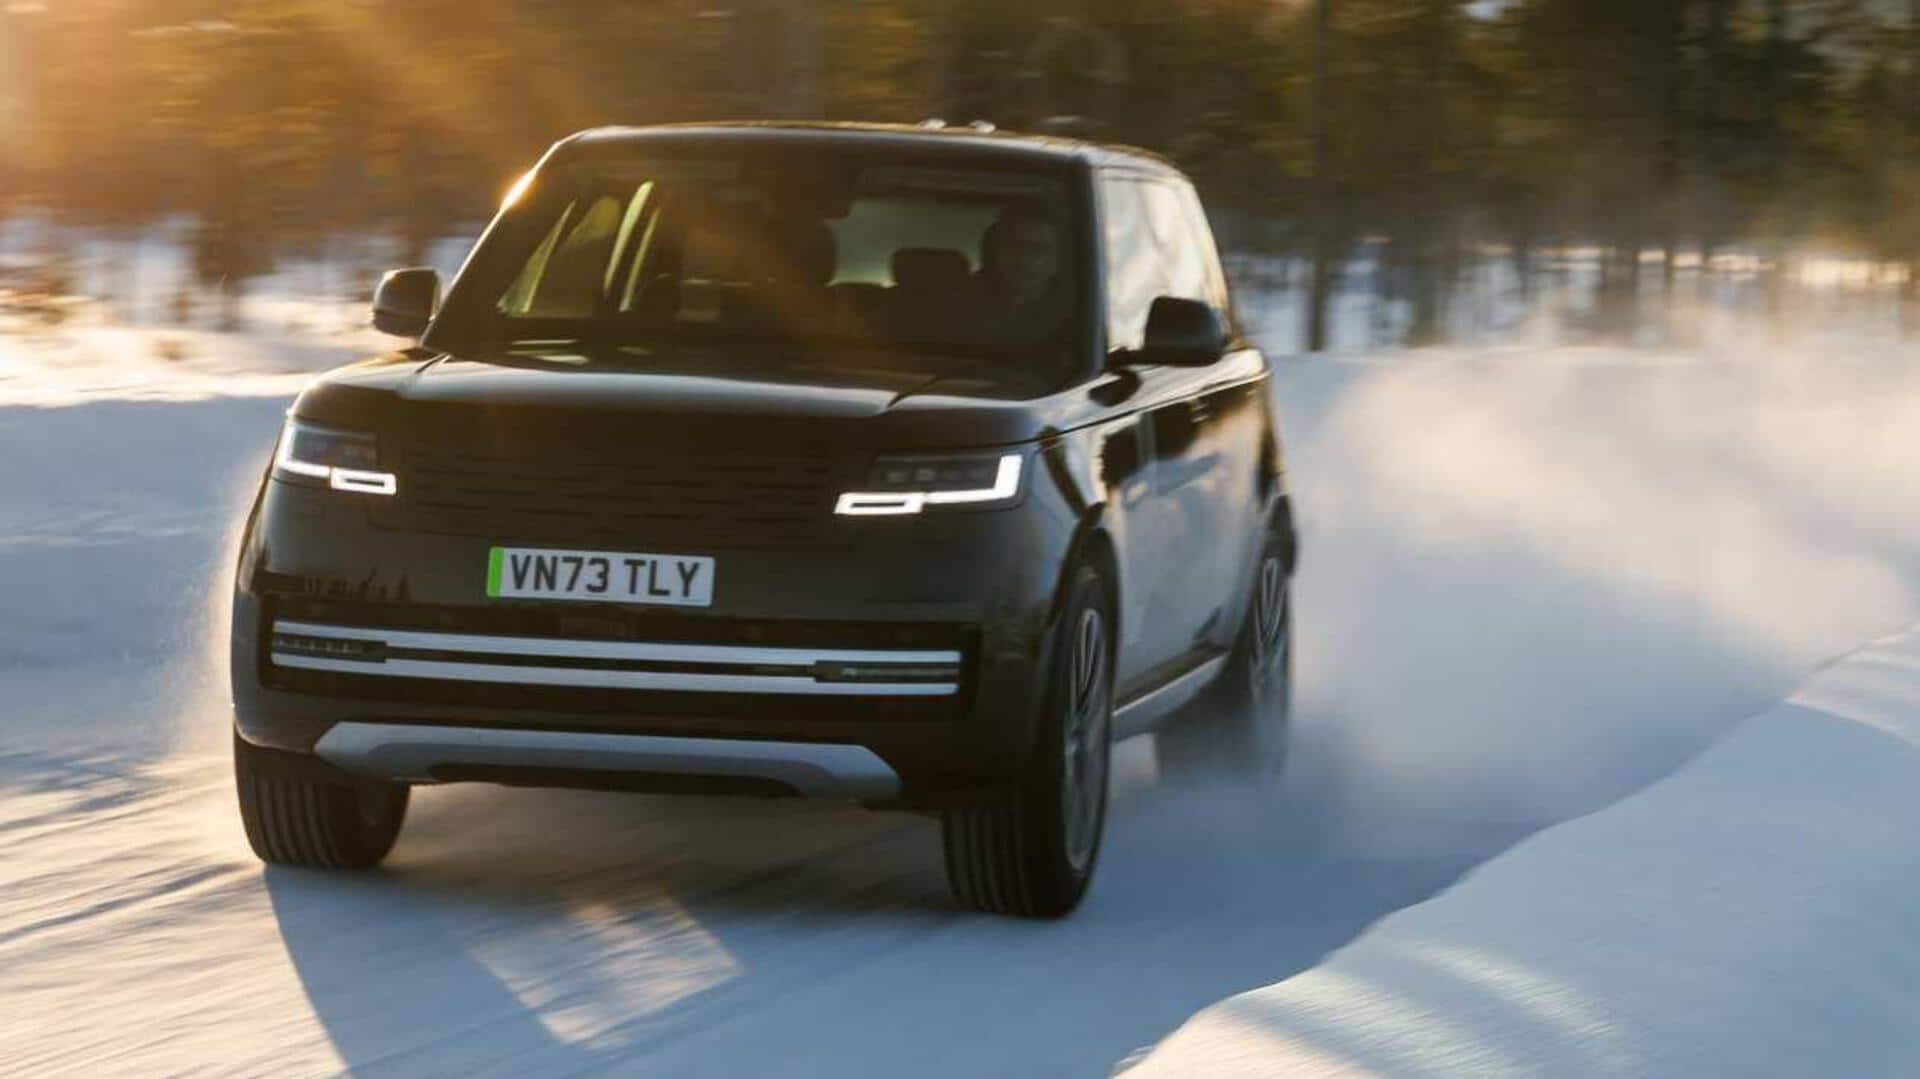 Range Rover previews its first all-electric SUV